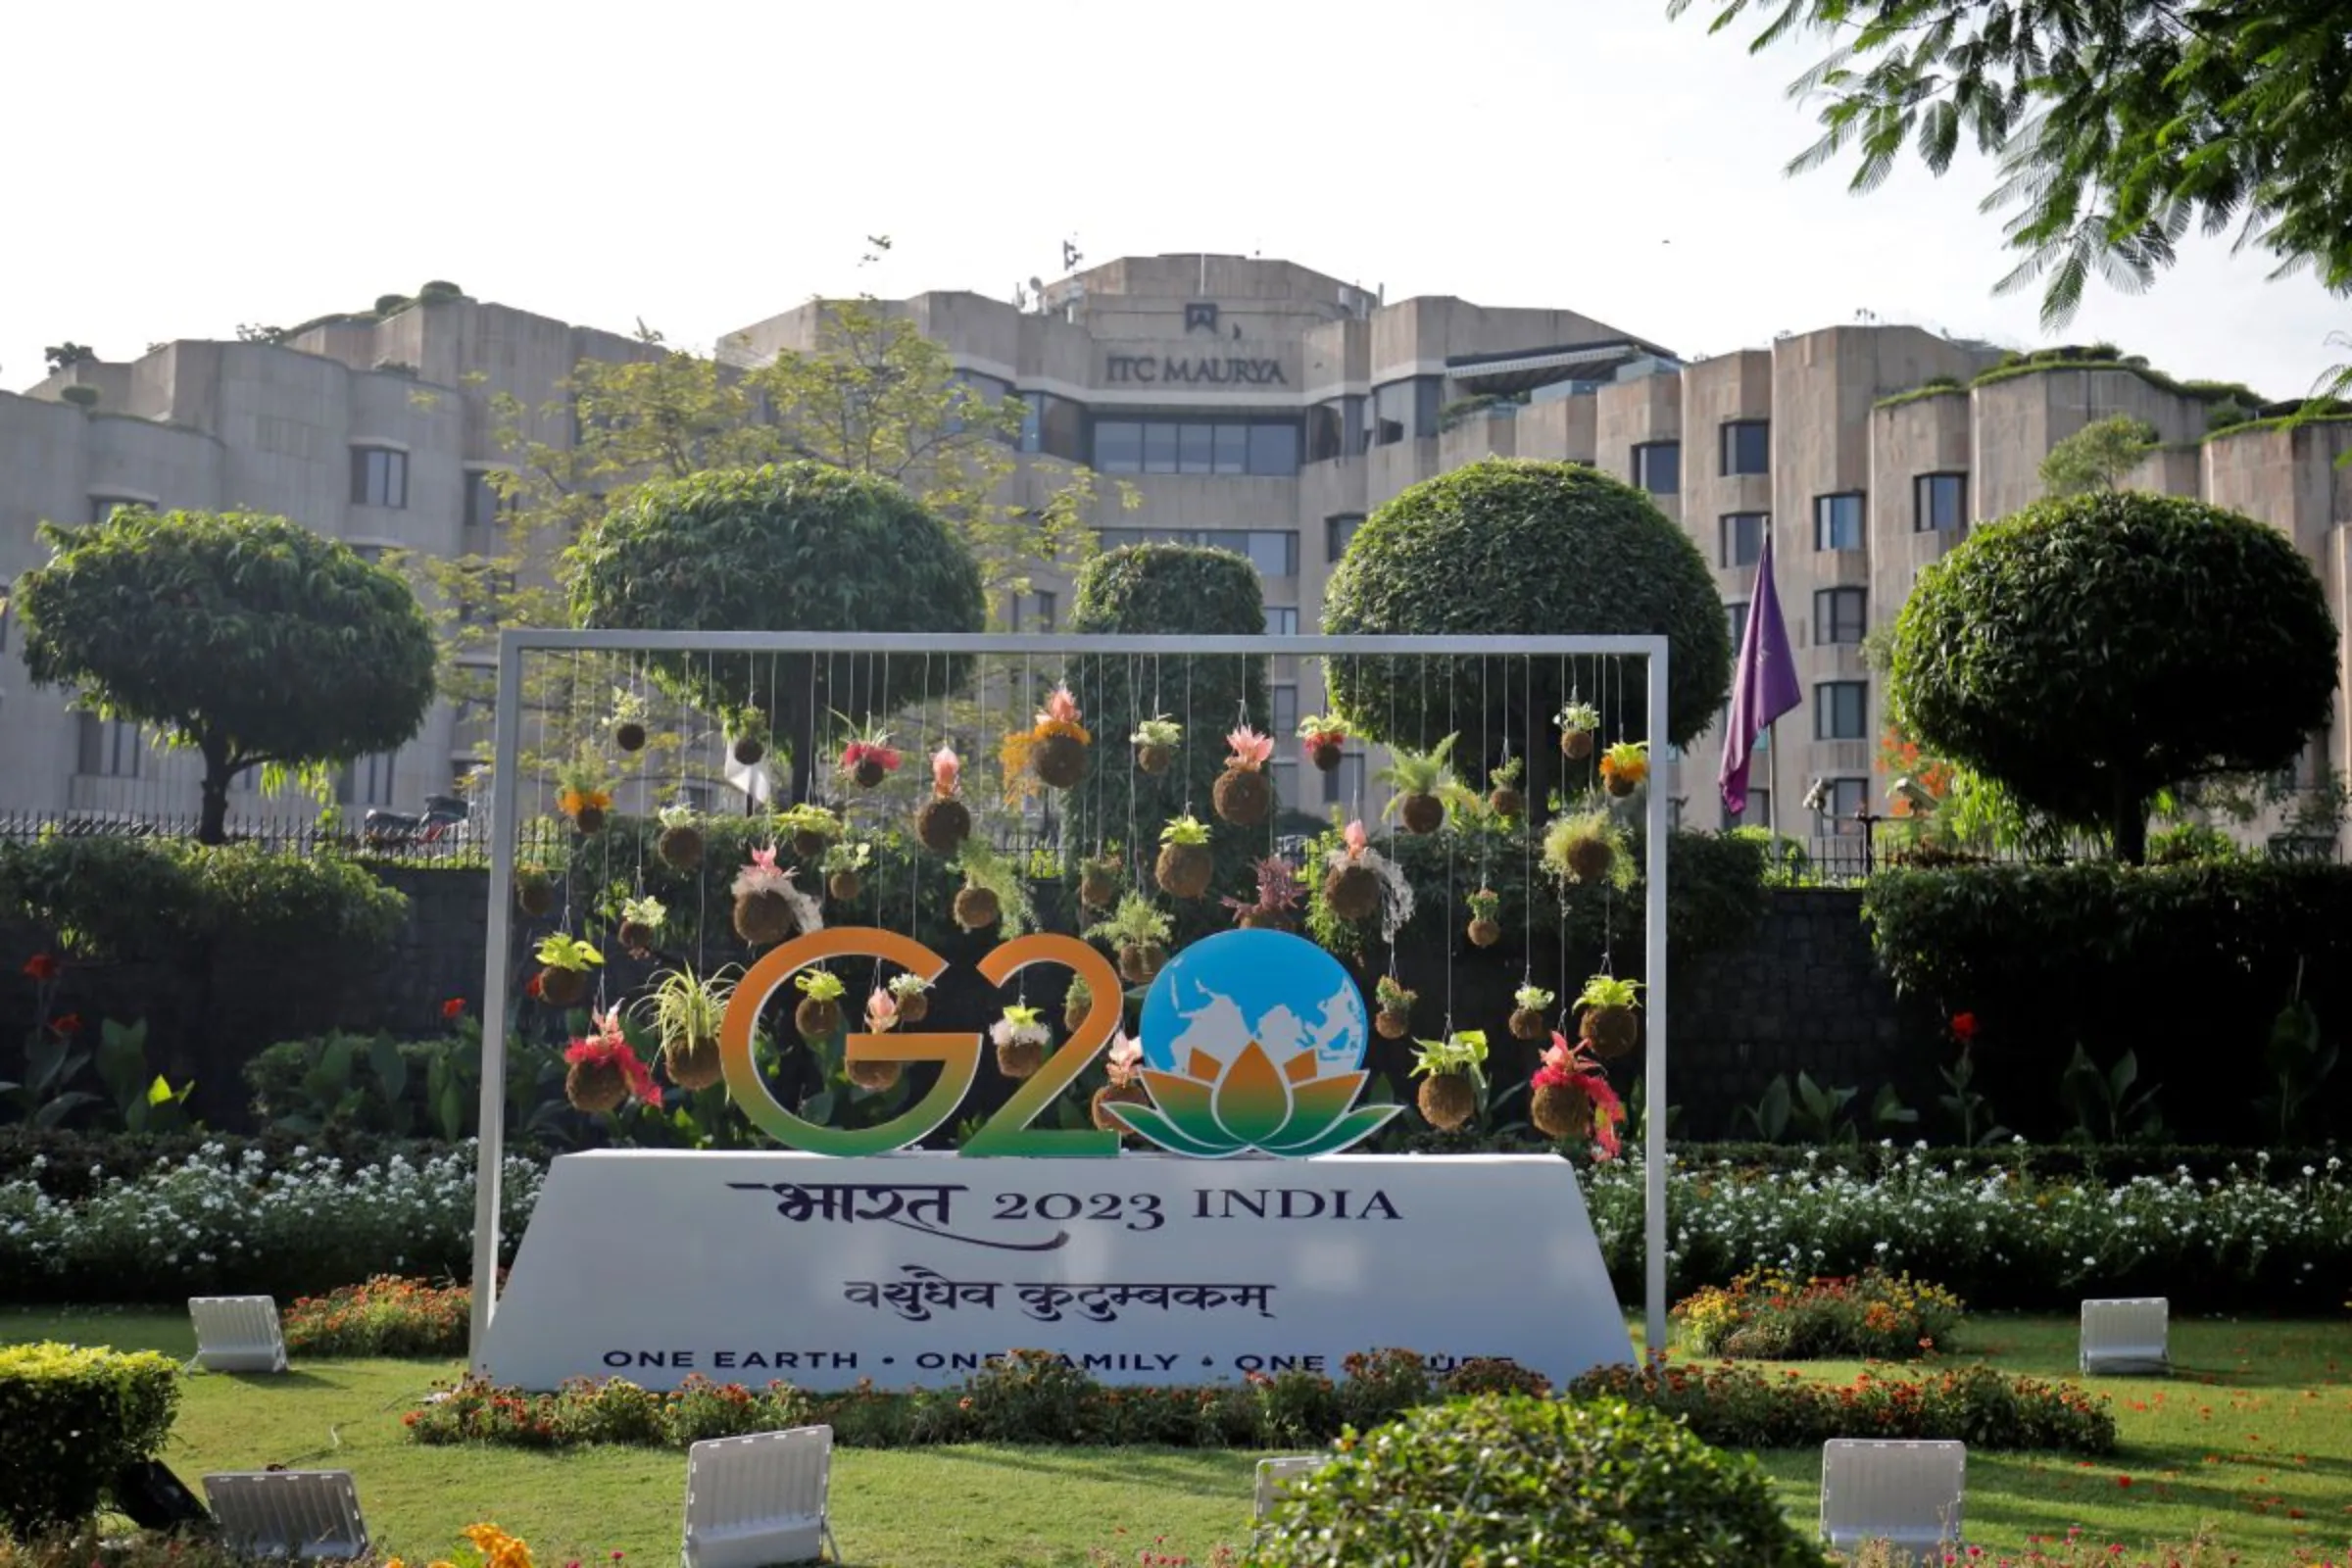 A model of G20 is pictured outside ITC Maurya hotel ahead of the G20 Summit in New Delhi, India, September 8, 2023